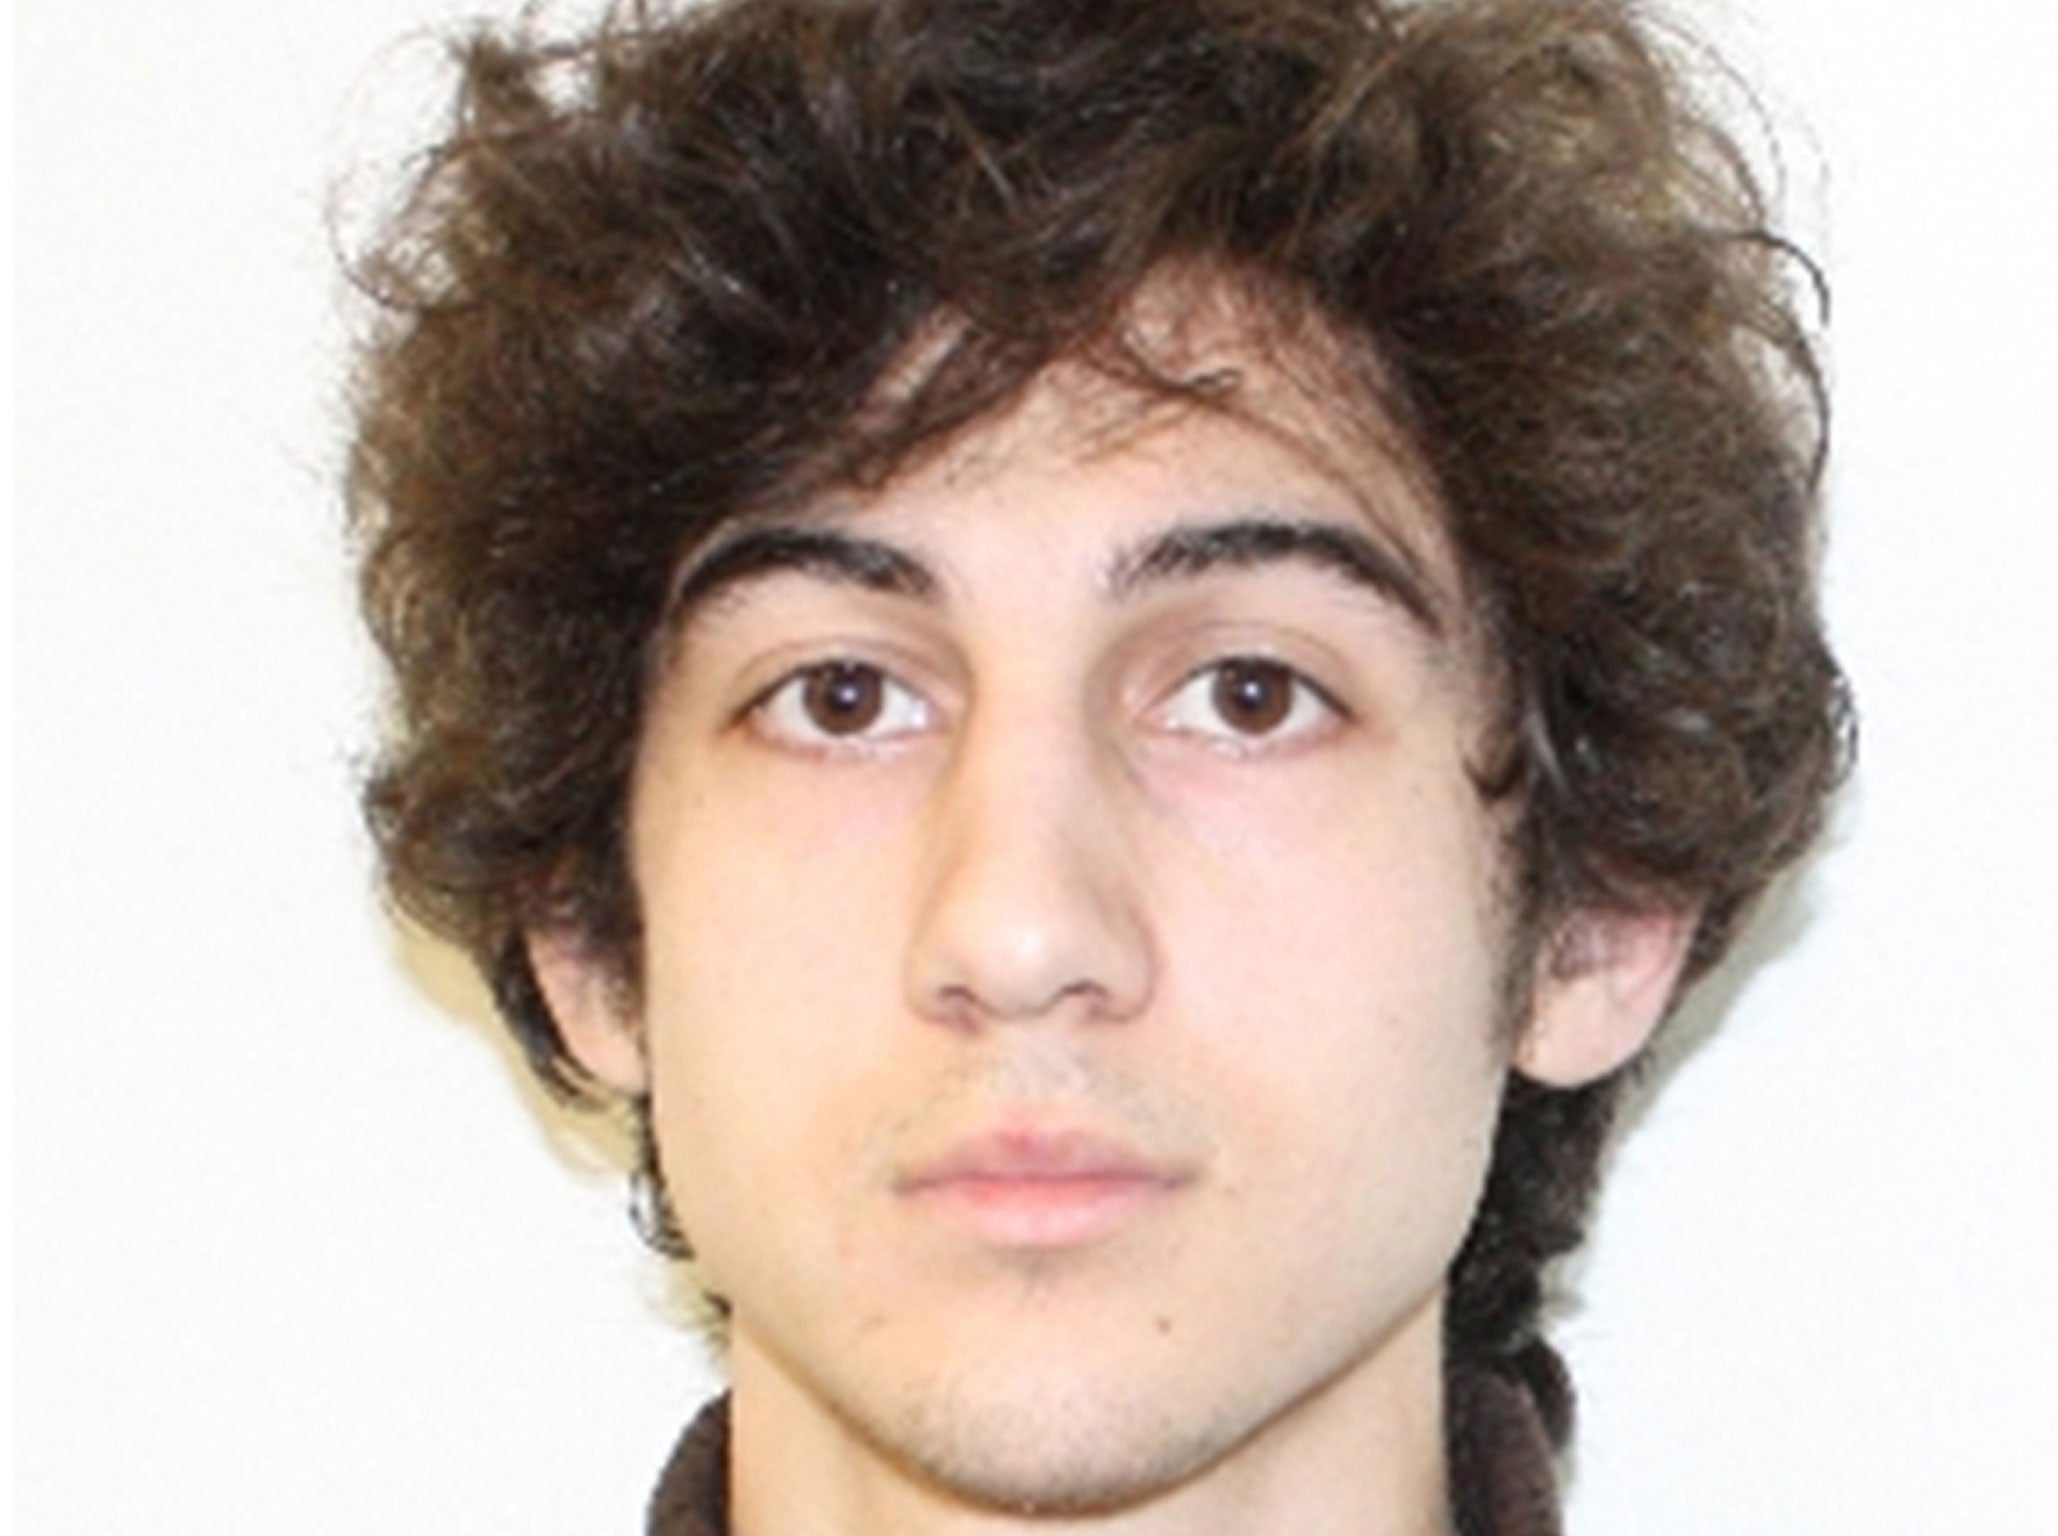 Dzhokhar Tsarnaev is being defended by Judy Clarke, a specialist in high-profile death penalty cases